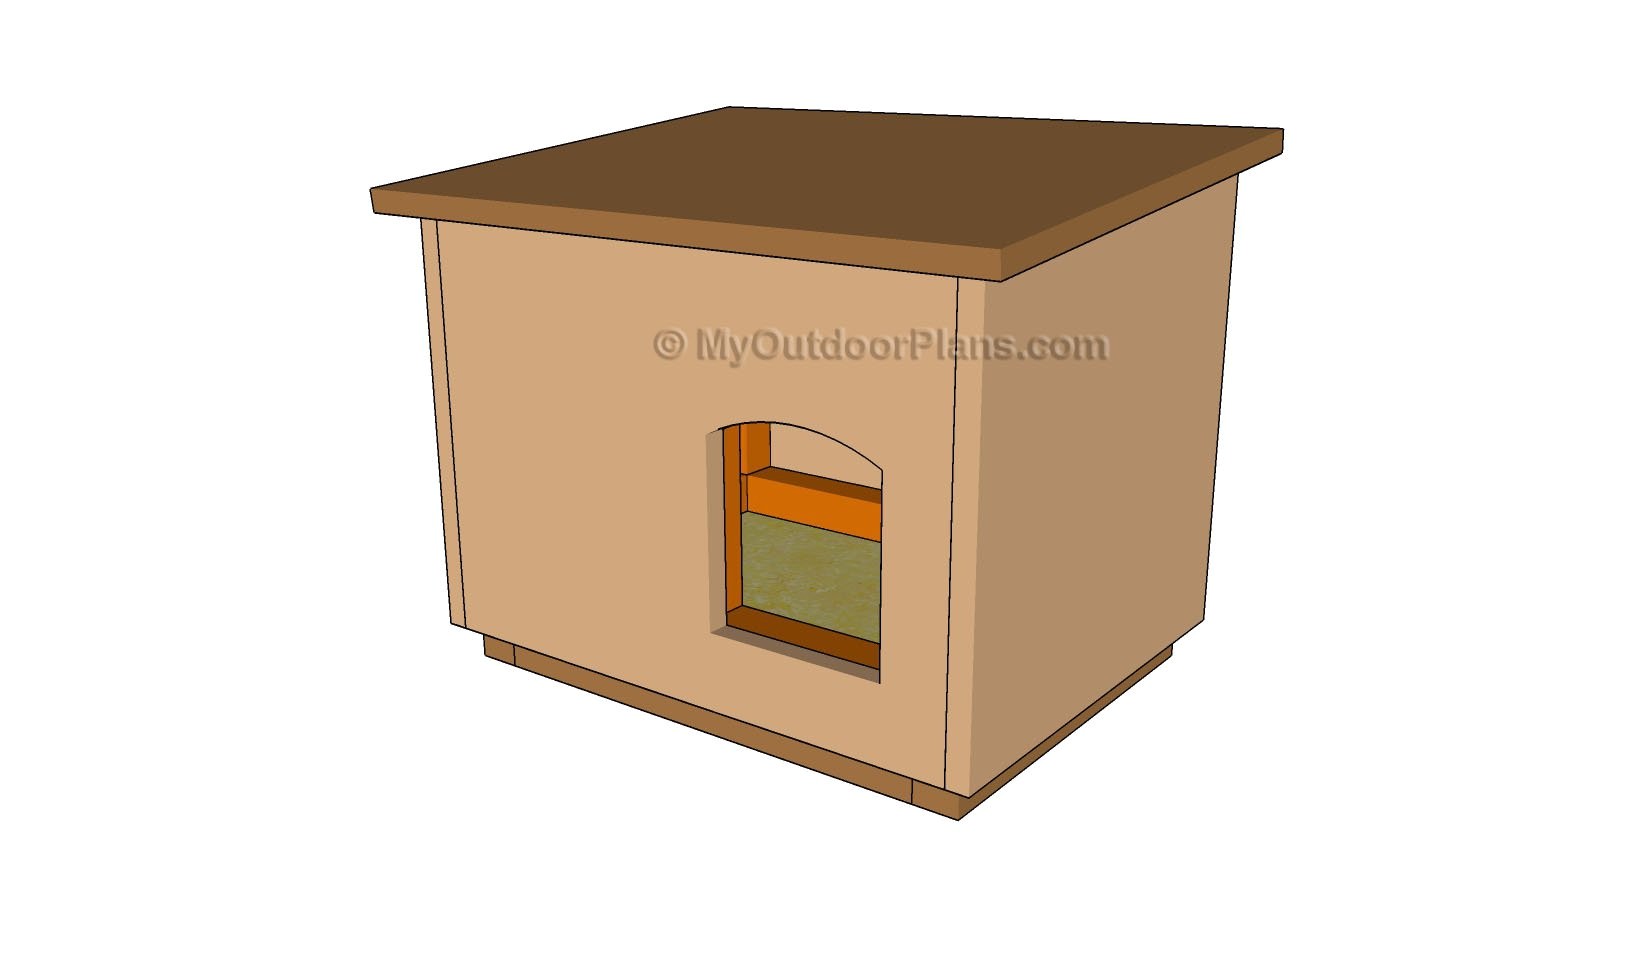 Plans for Cat House Outdoor Cat House Plans Myoutdoorplans Free